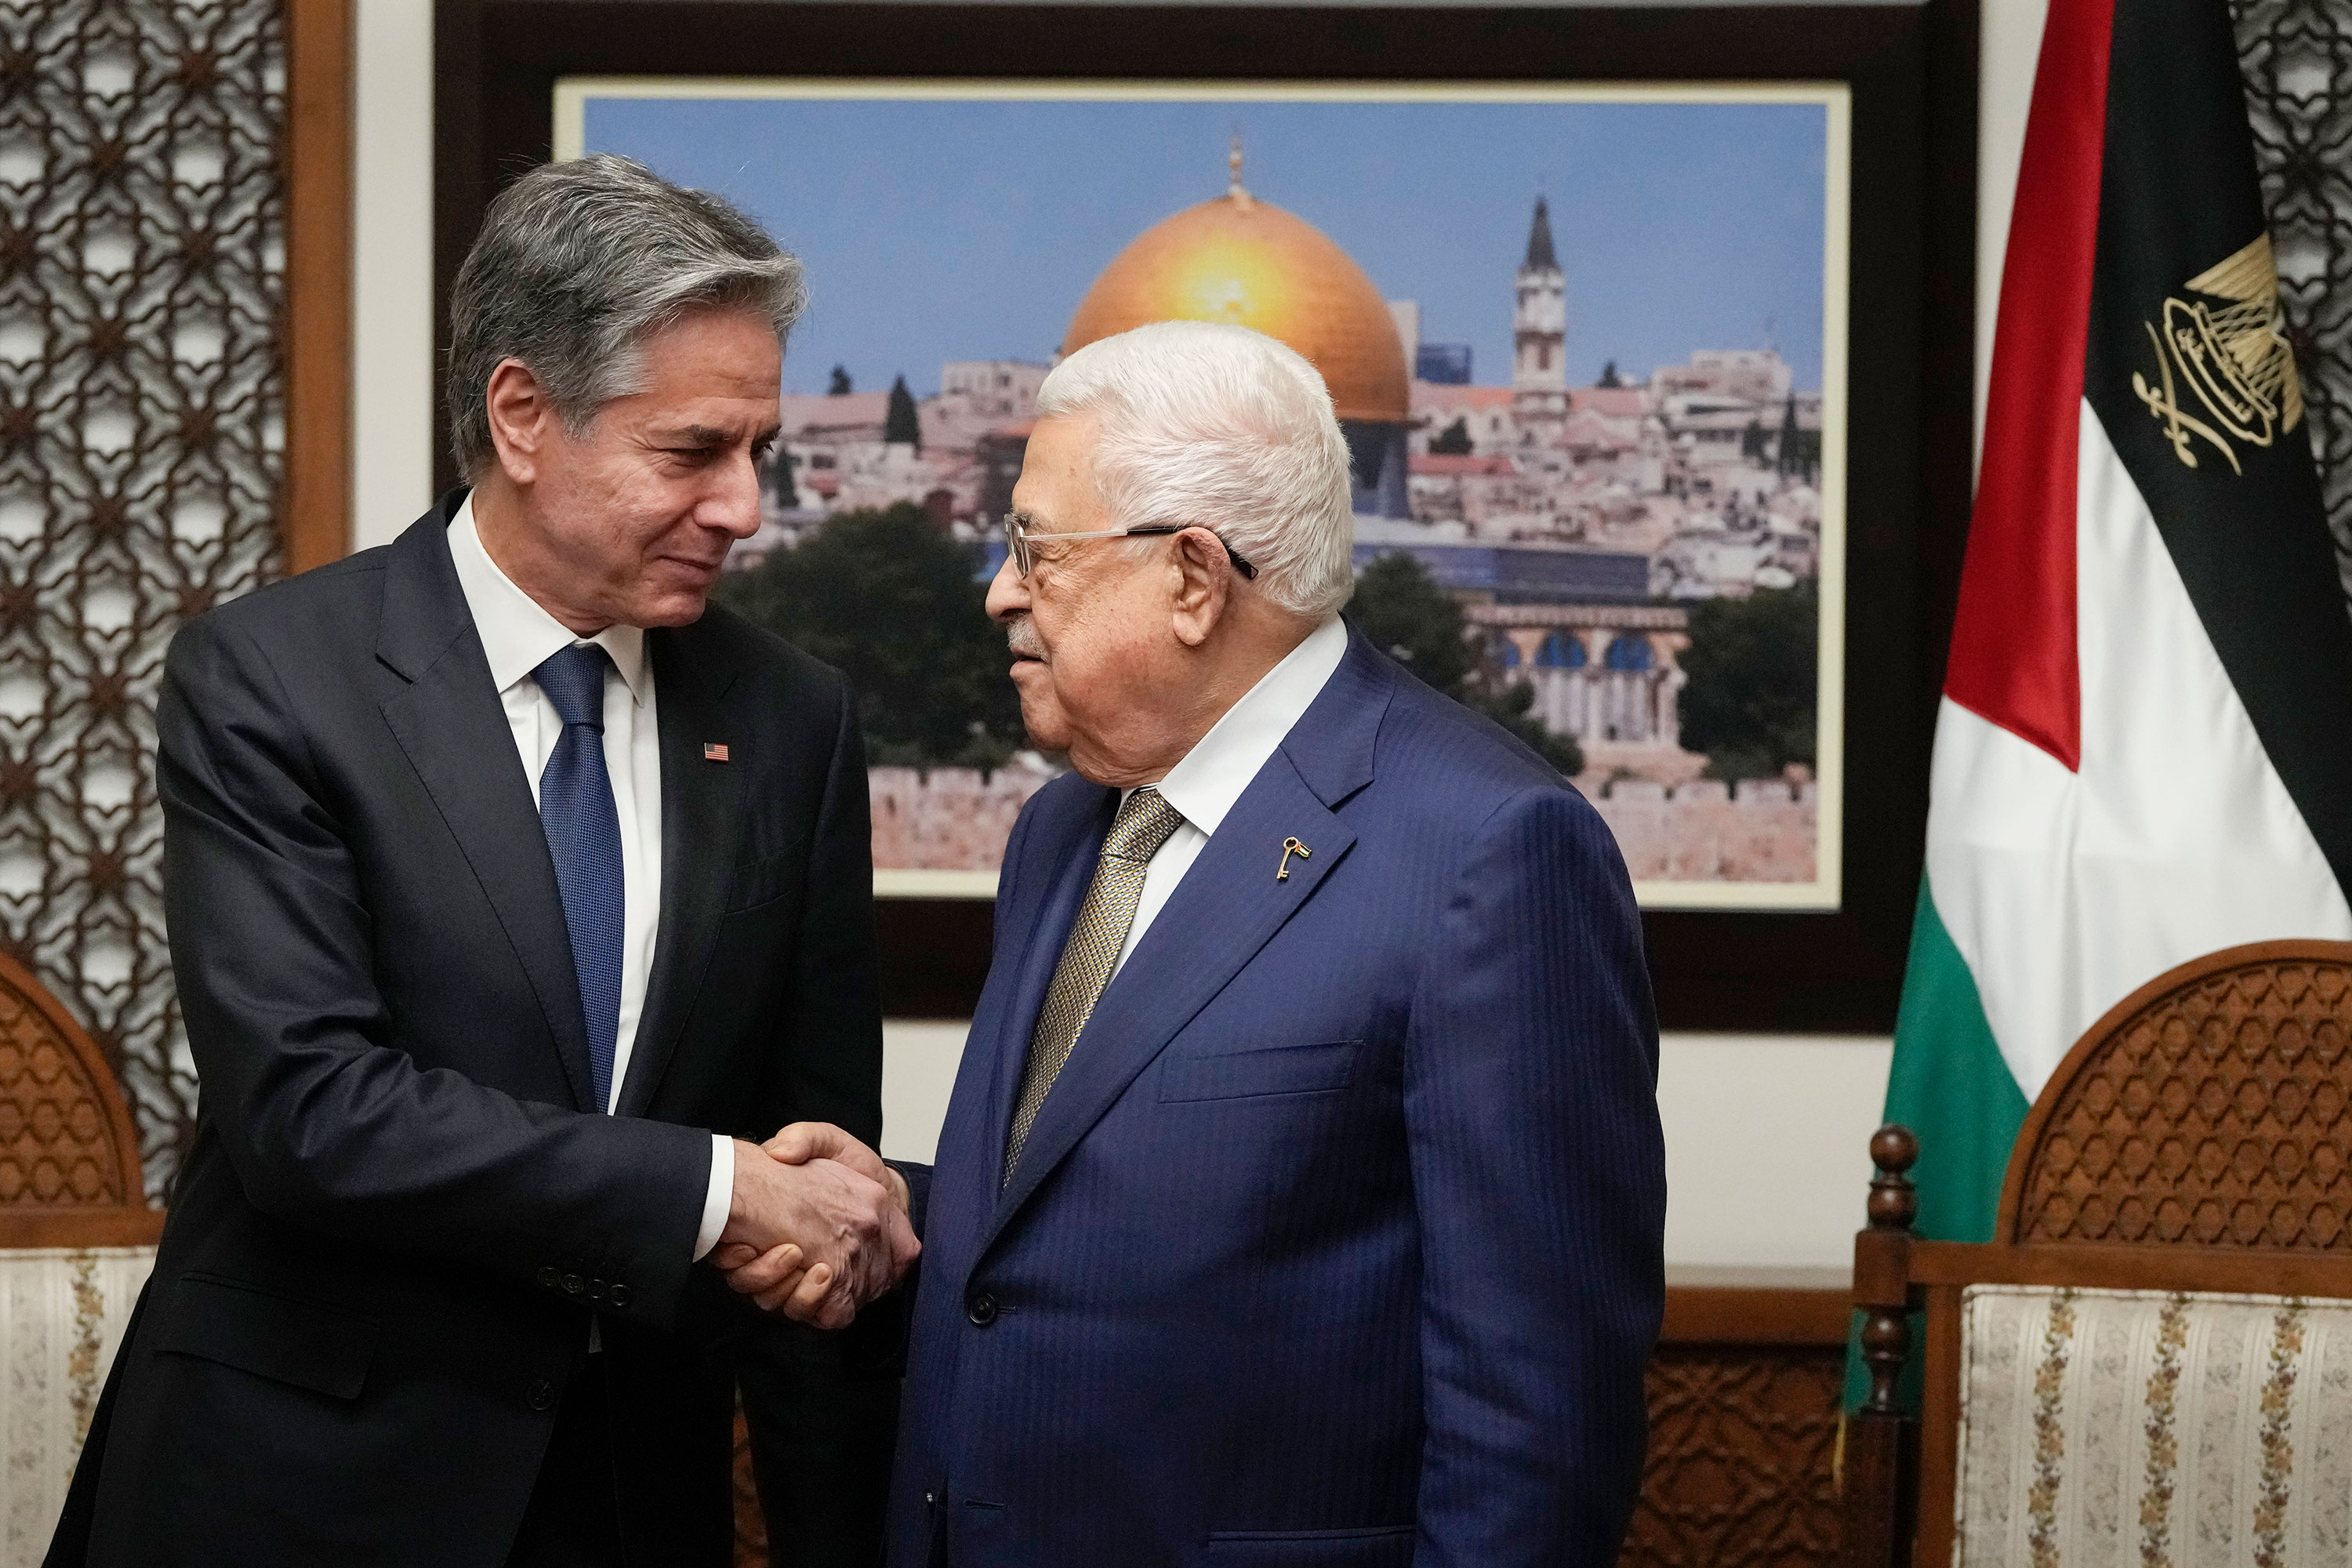 US Secretary of State Antony Blinken, left, shakes hands with Palestinian Authority President Mahmoud Abbas in the West Bank town of Ramallah on February 7. 